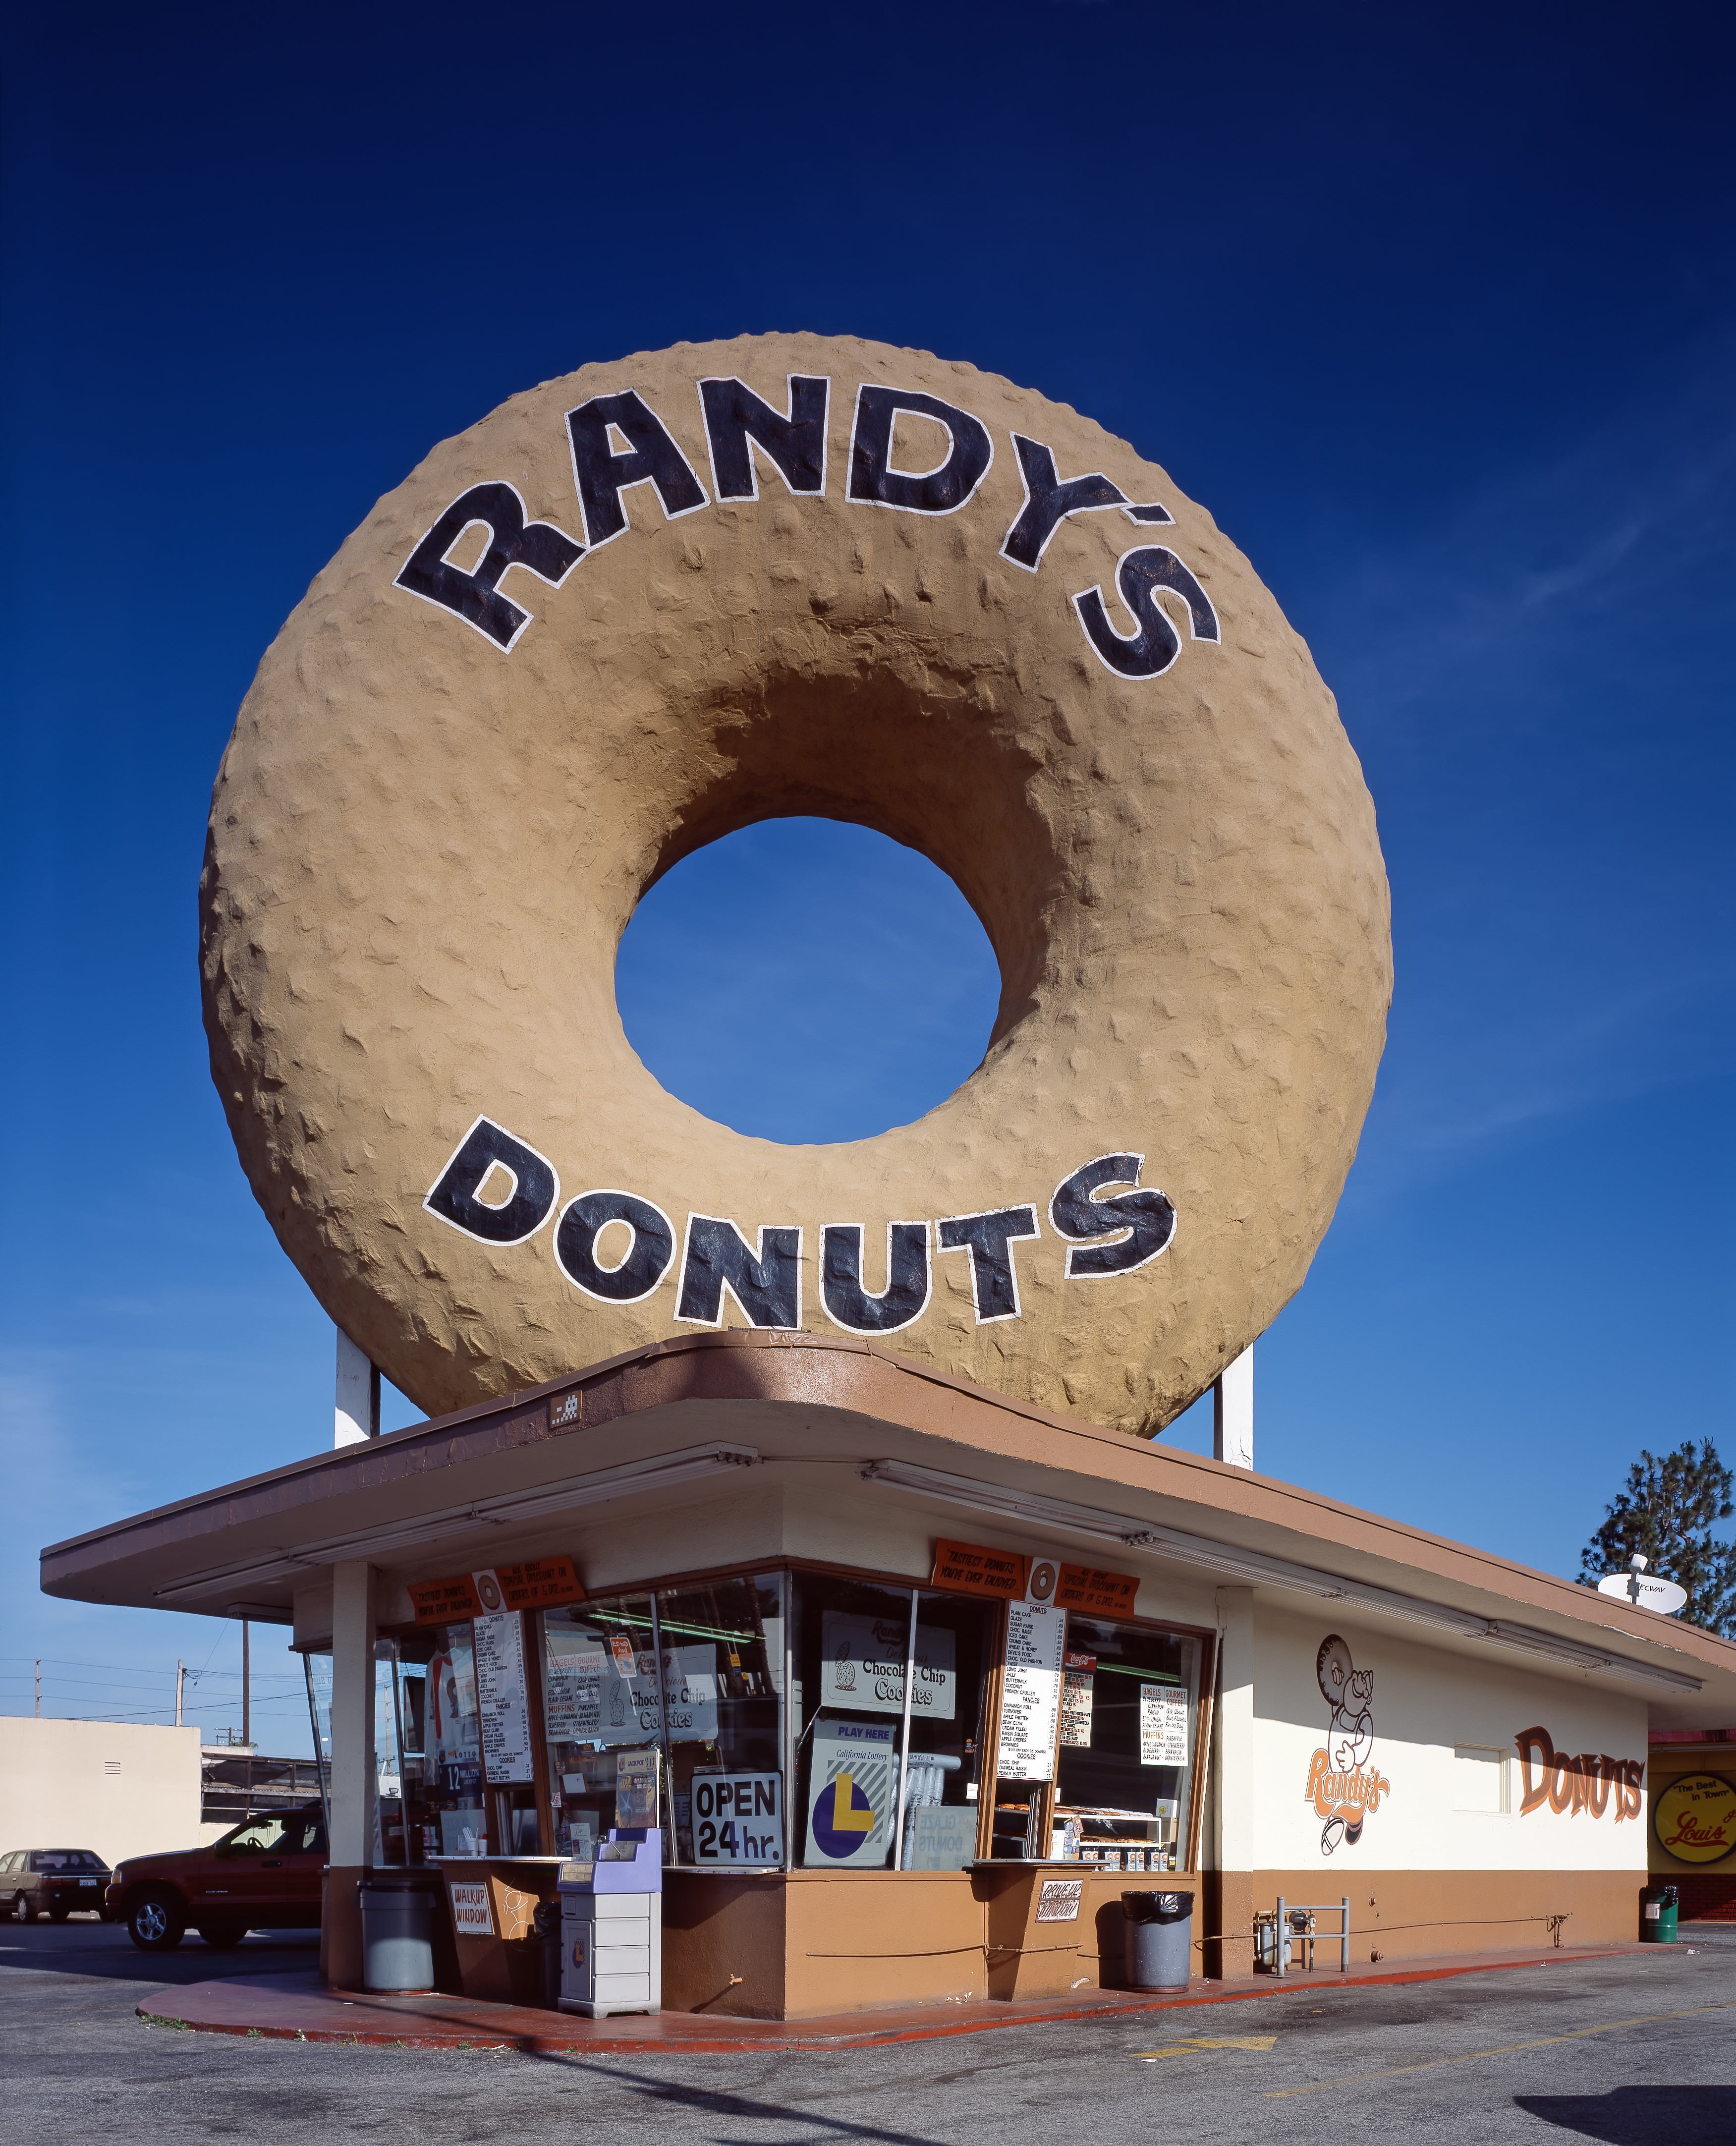 person taking photo of Randy's Donuts store at daytime, doughnut